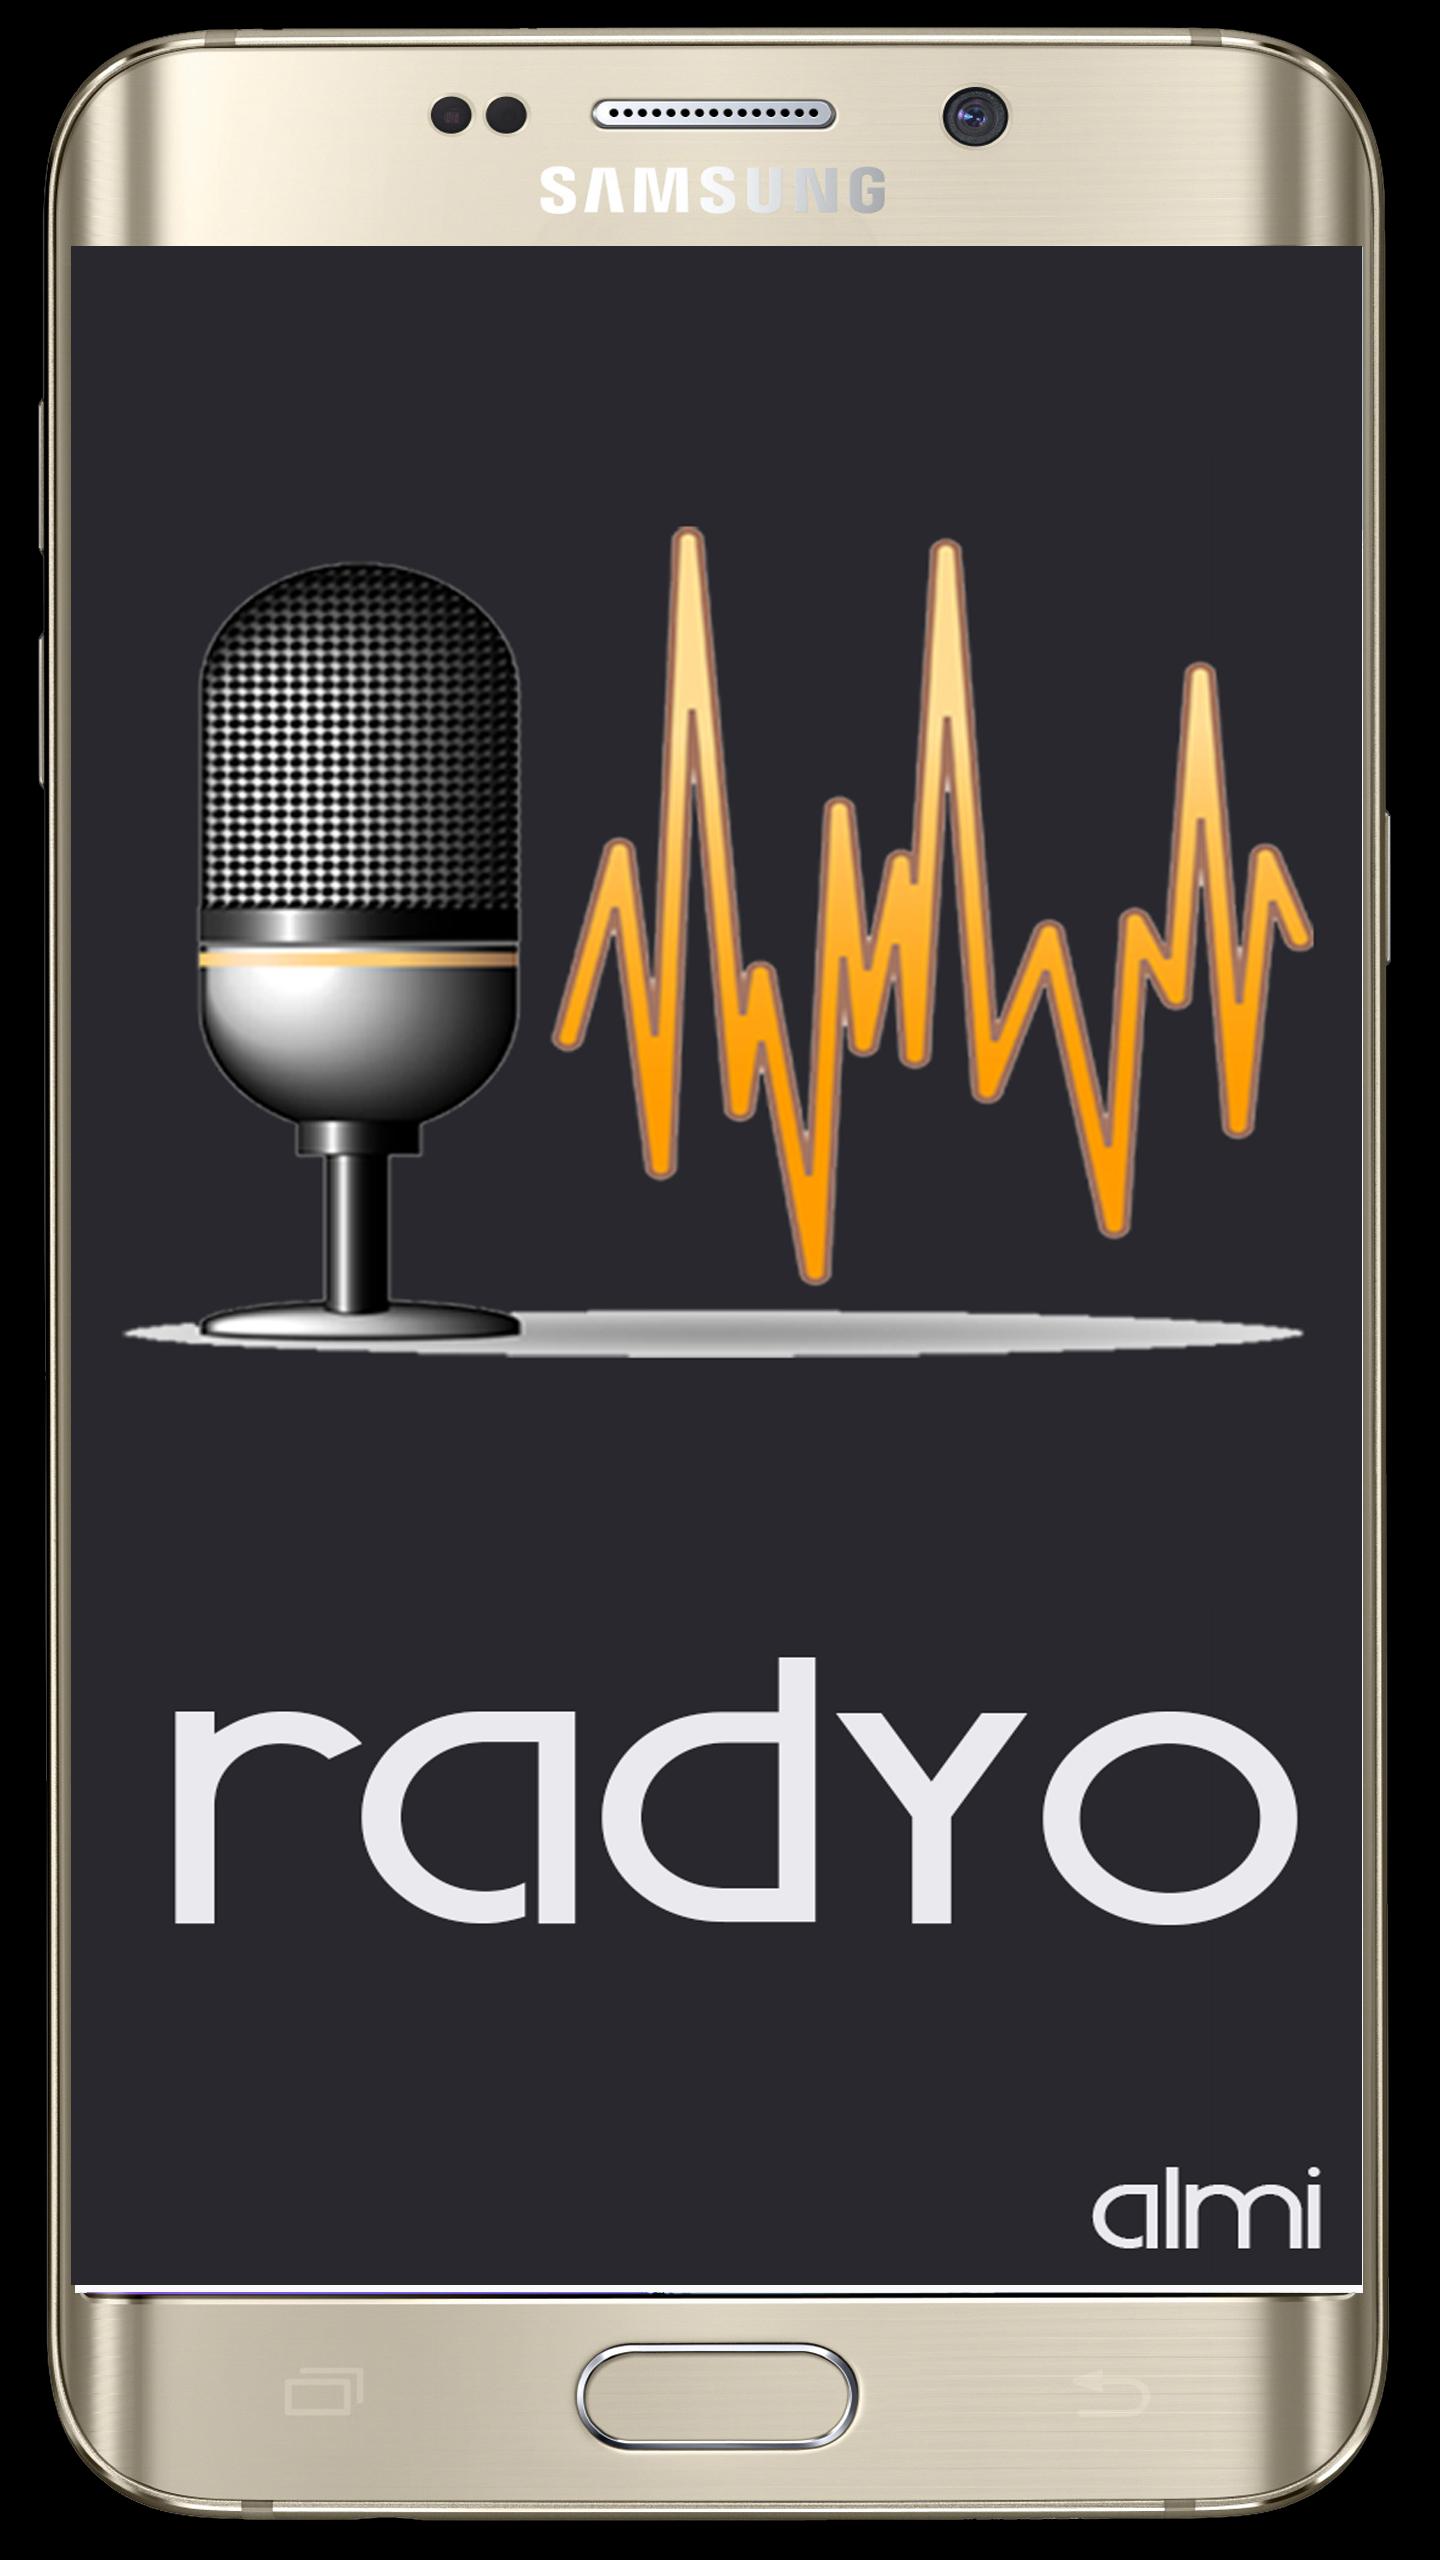 Radyo Dinle for Android - APK Download